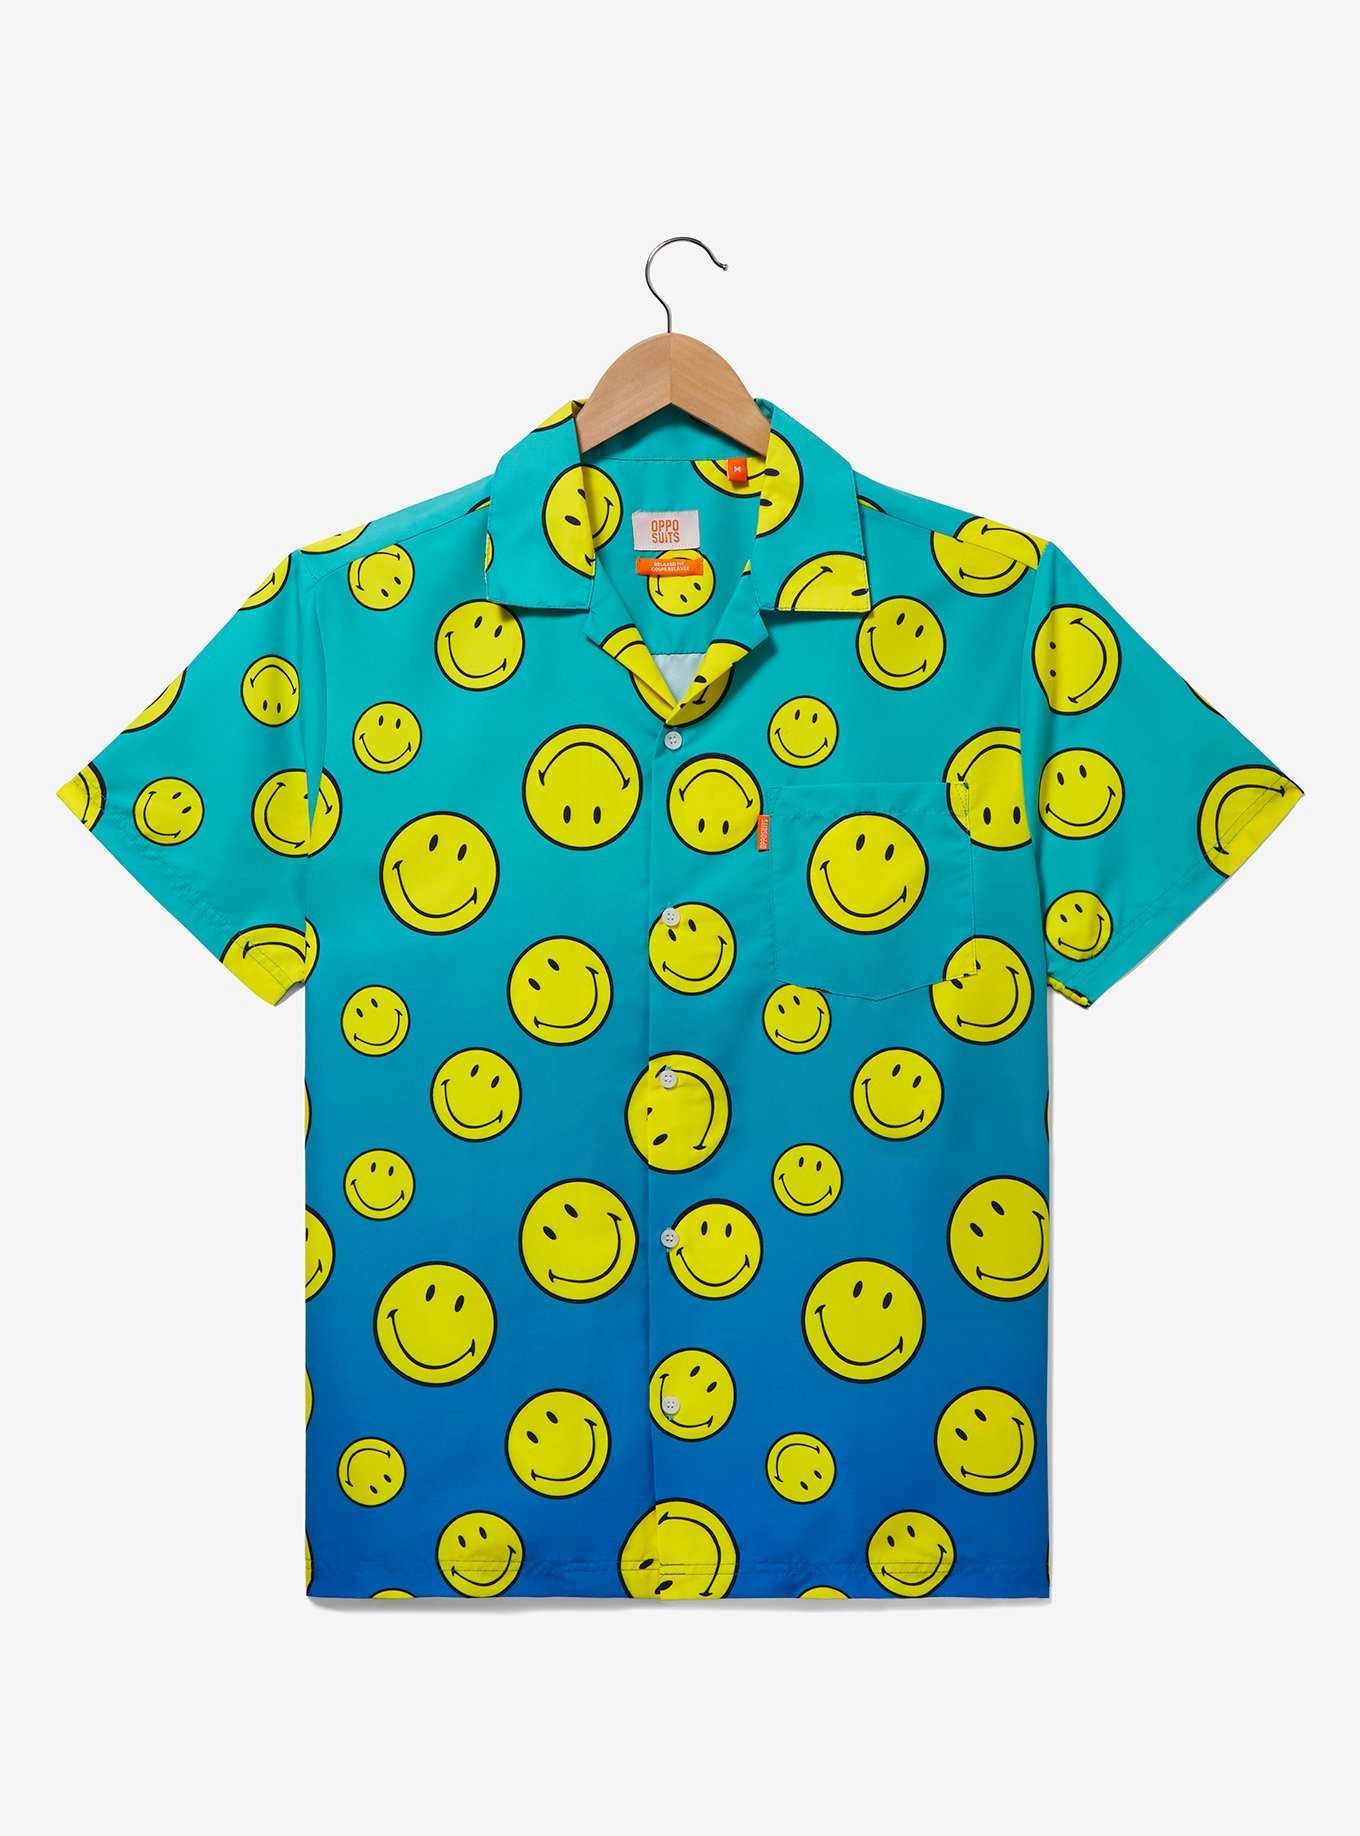 OppoSuits Smiles Allover Print Woven Button-Up - BoxLunch Exclusive, , hi-res